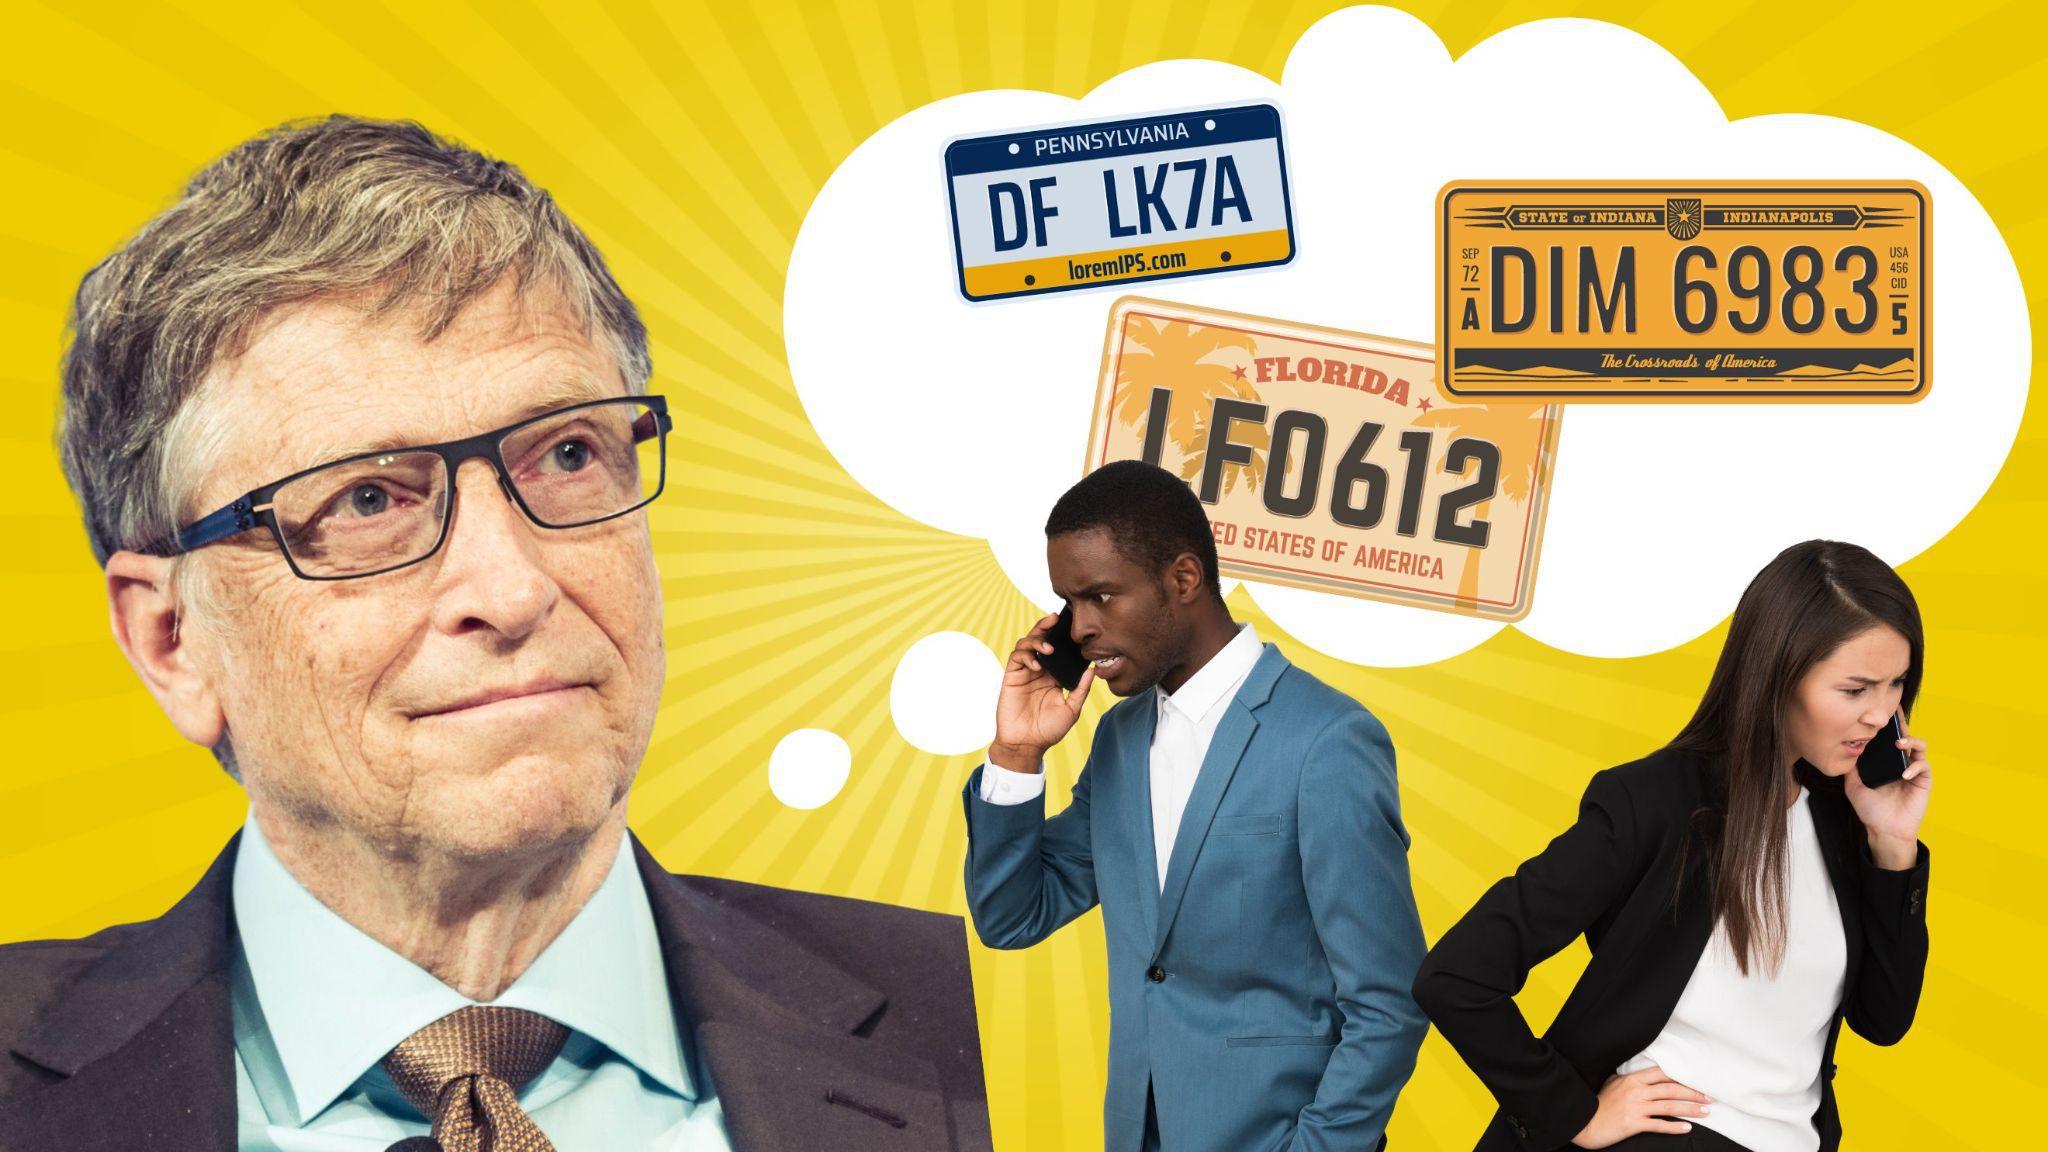 Bill Gates sits on top of a yellow thumbnail background, thinking about license plates. Angry co-workers are also overlaid.